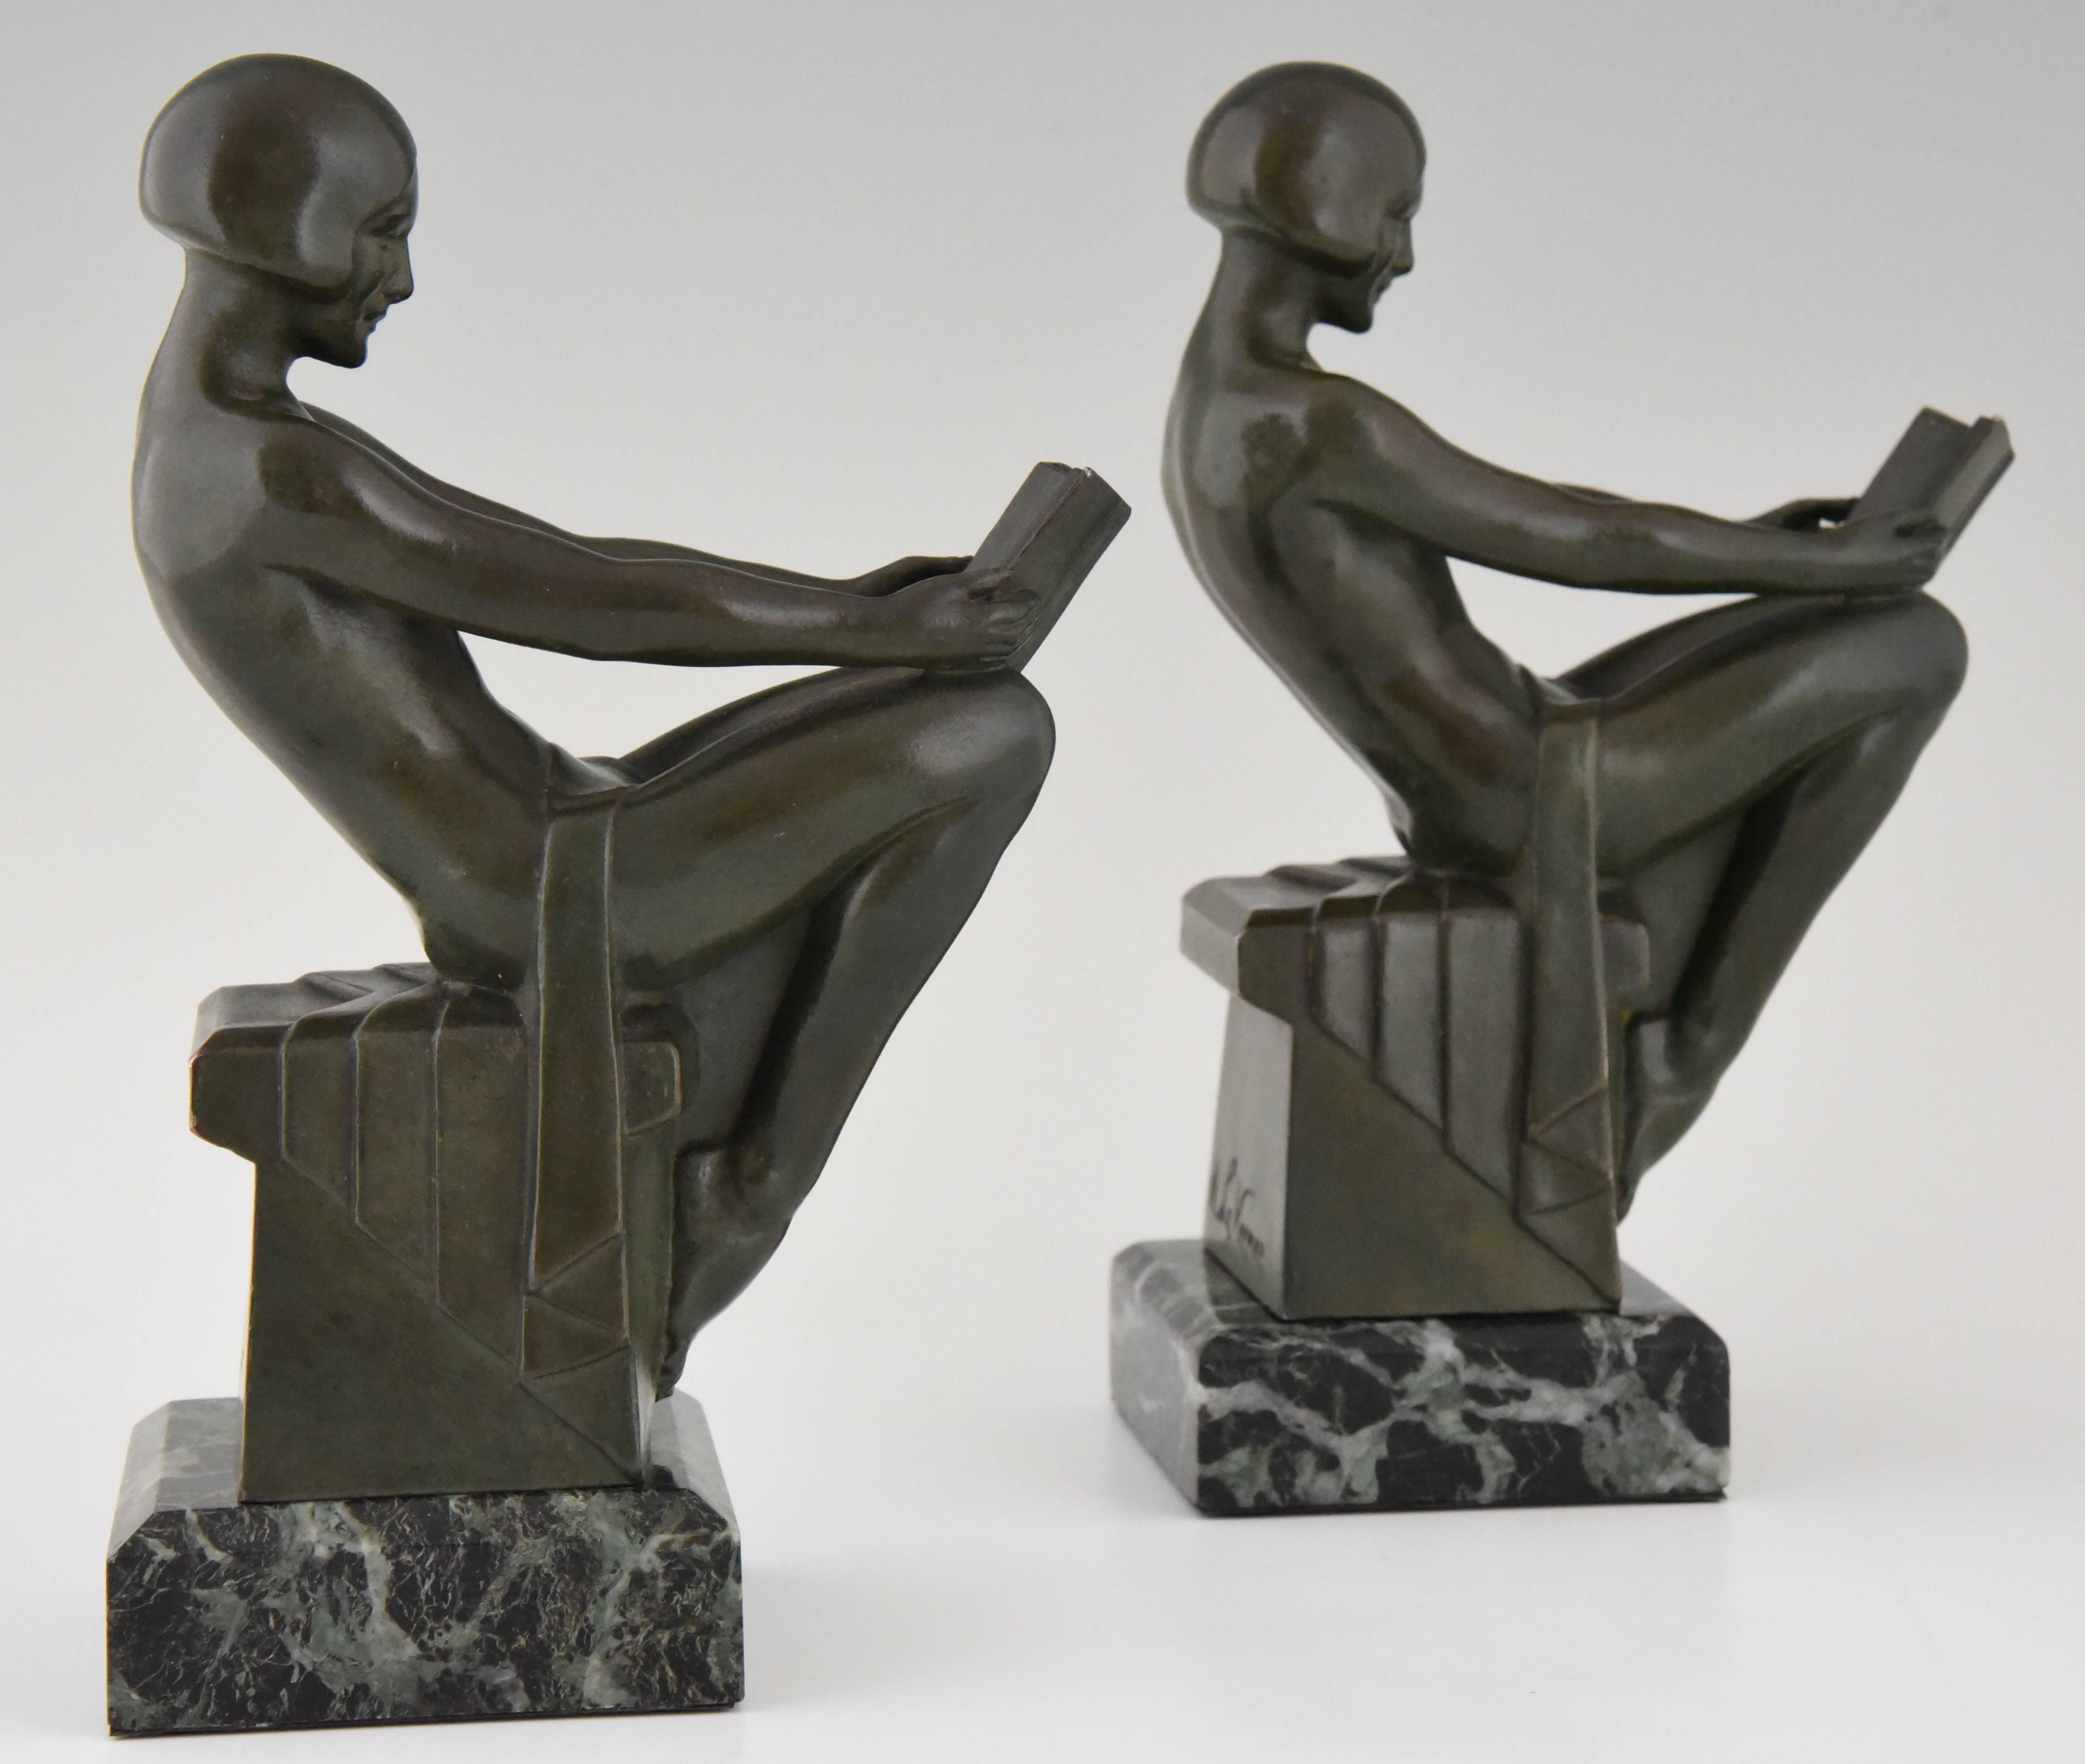 French Art Deco Bookends with Reading Nudes by Max Le Verrier, 1930 France